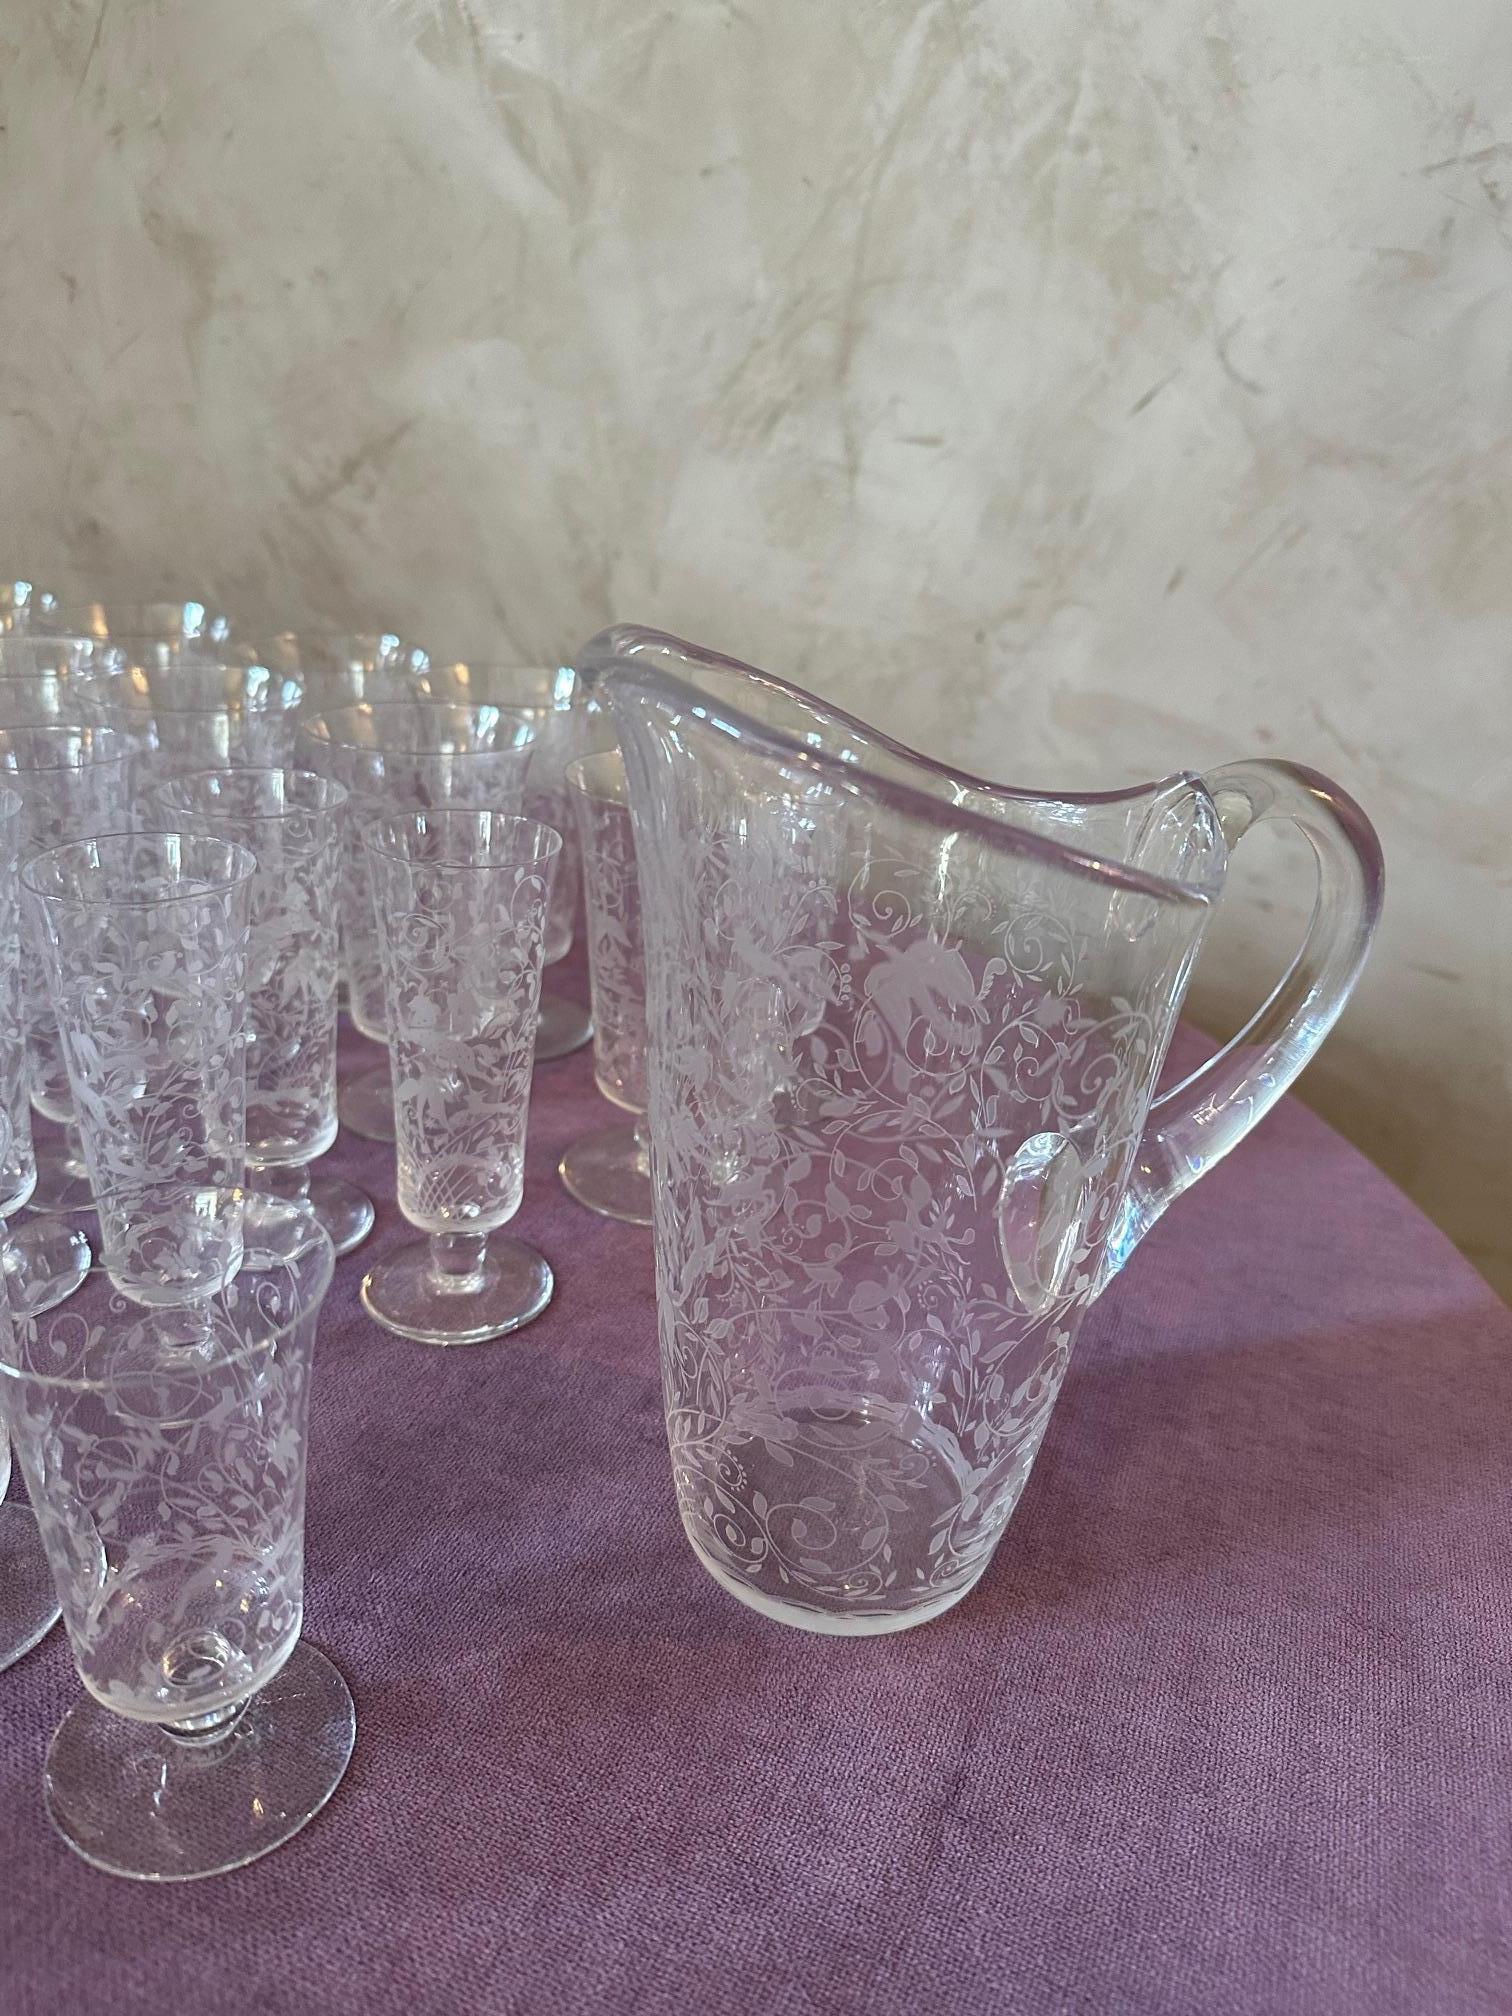 20th century French Set of Crystal Baccarat Glasses, Pitcher and Decanter For Sale 10